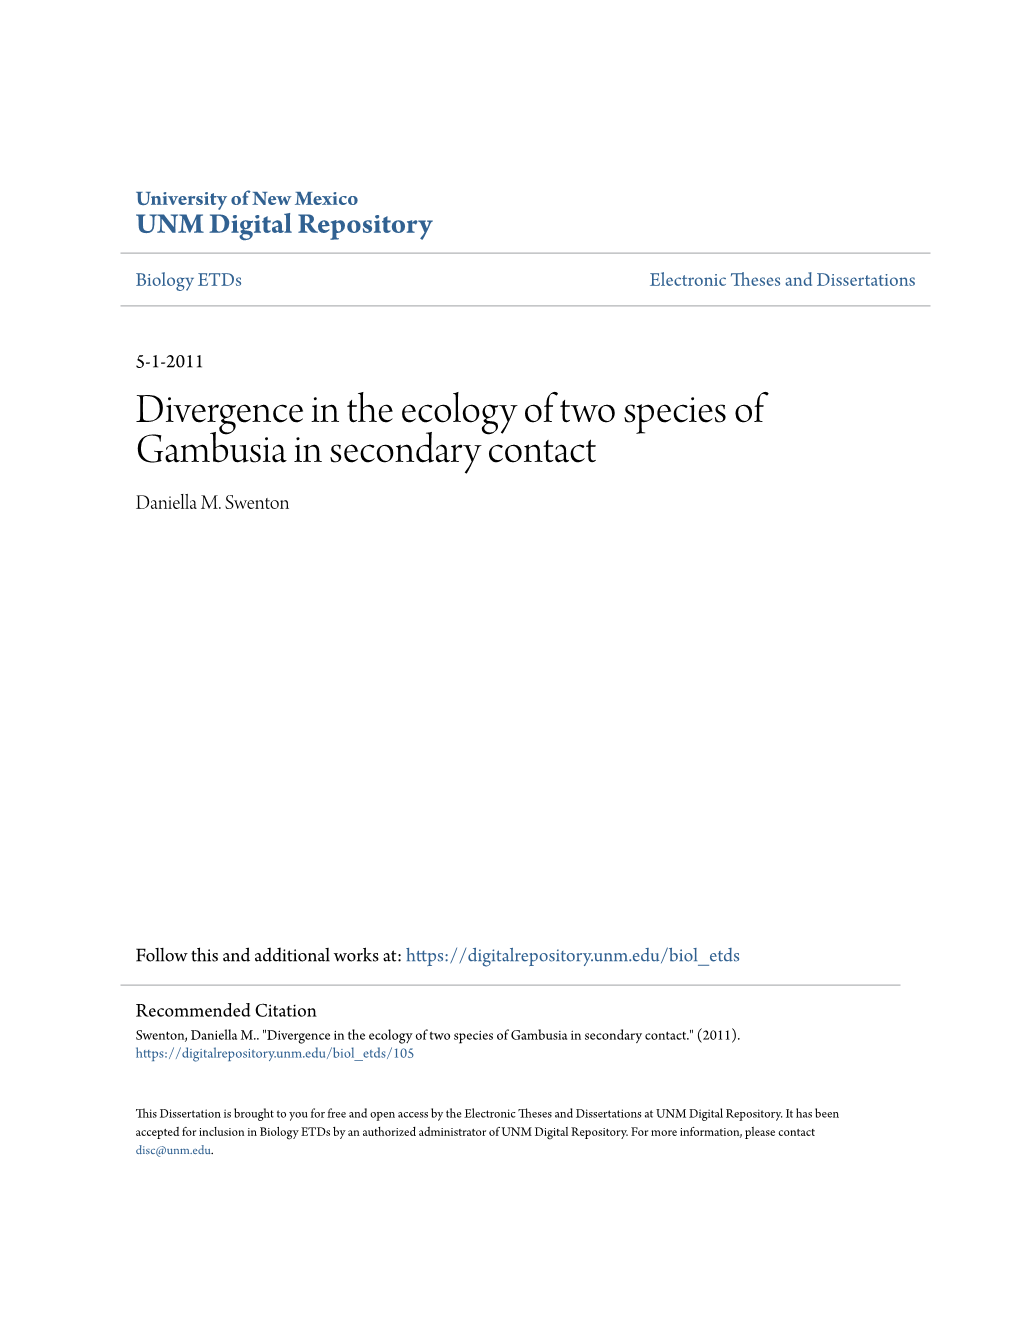 Divergence in the Ecology of Two Species of Gambusia in Secondary Contact Daniella M